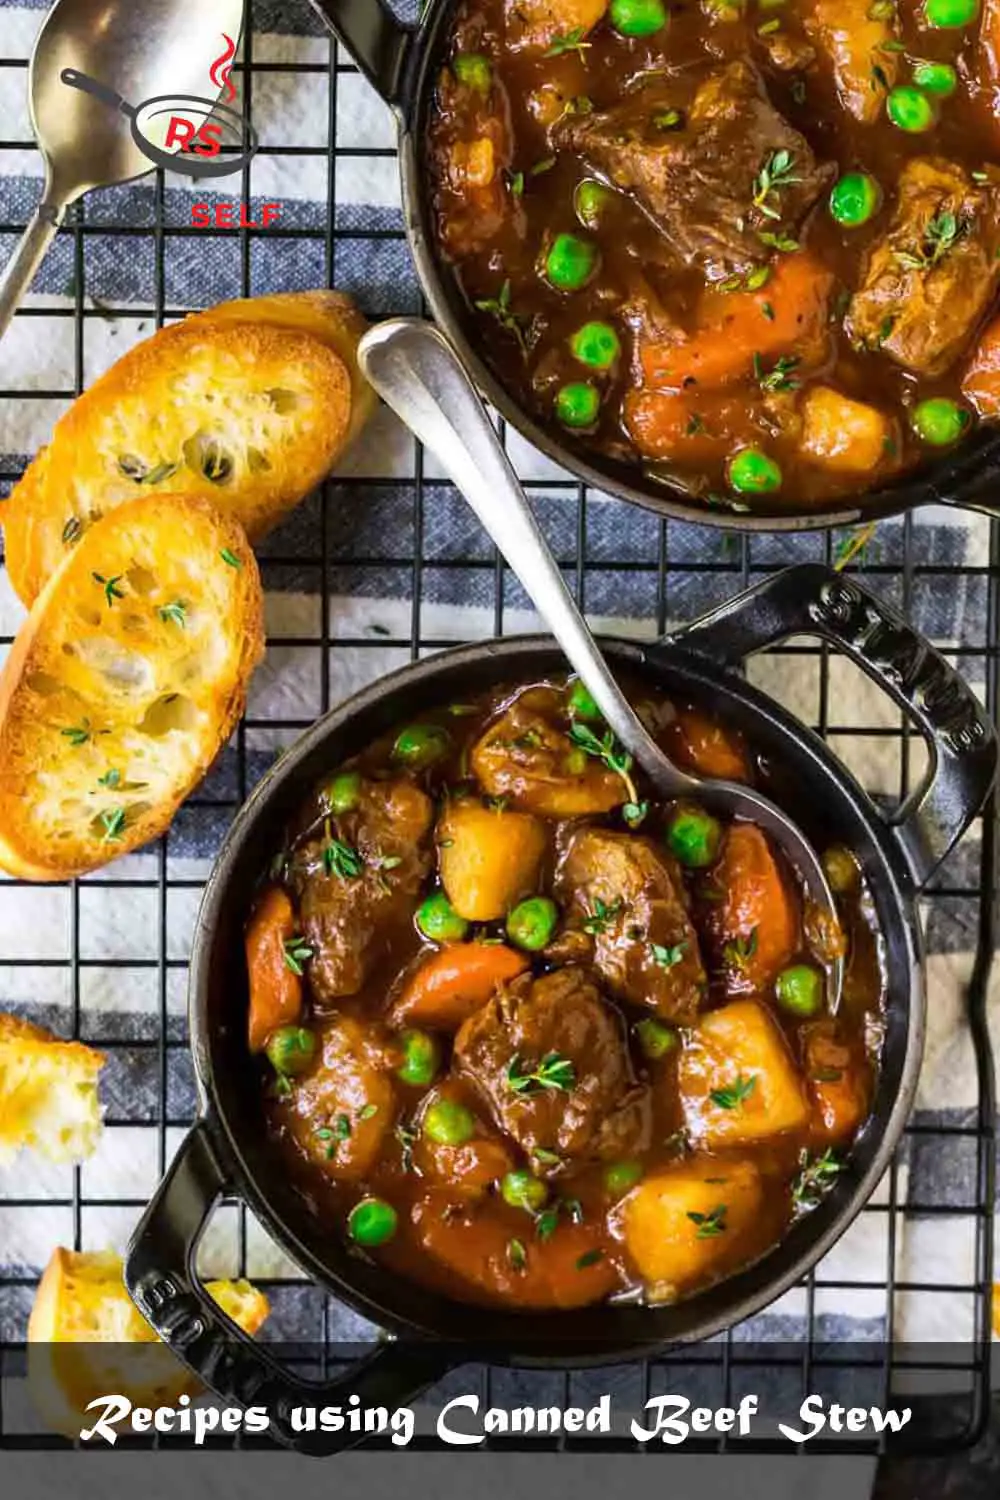 Recipes using Canned Beef Stew